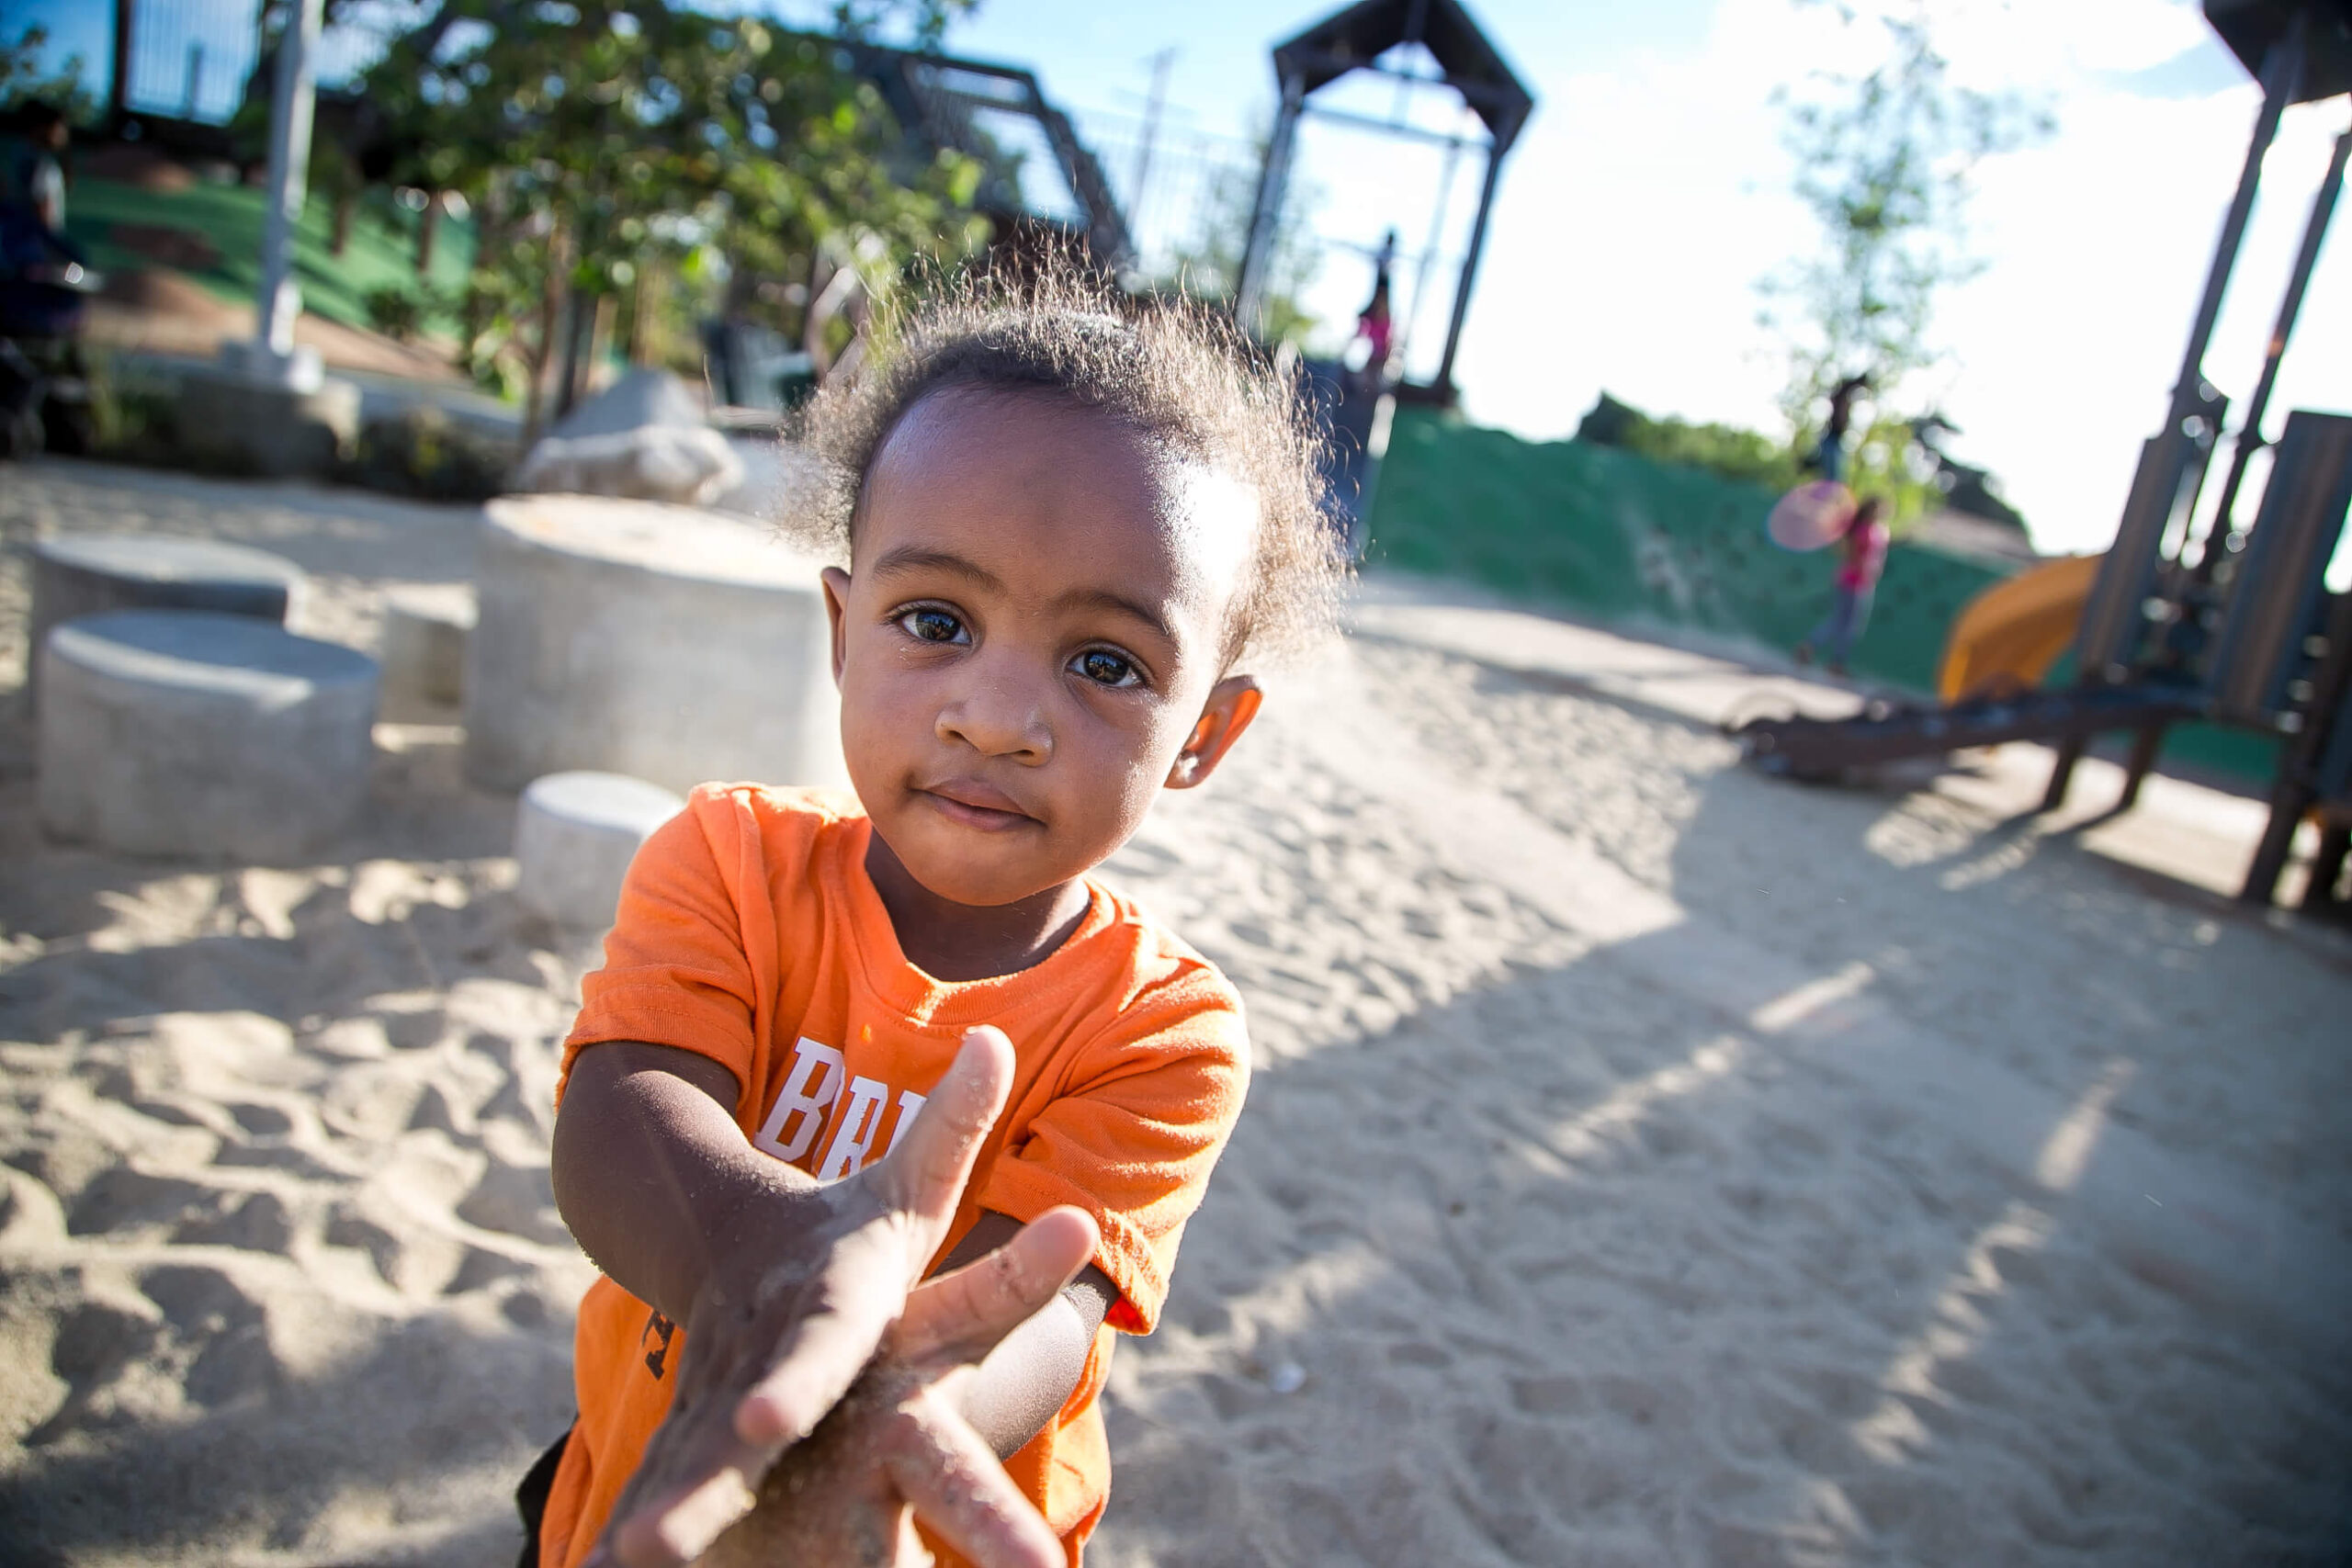 A young boy is playing in the sand at a playground.